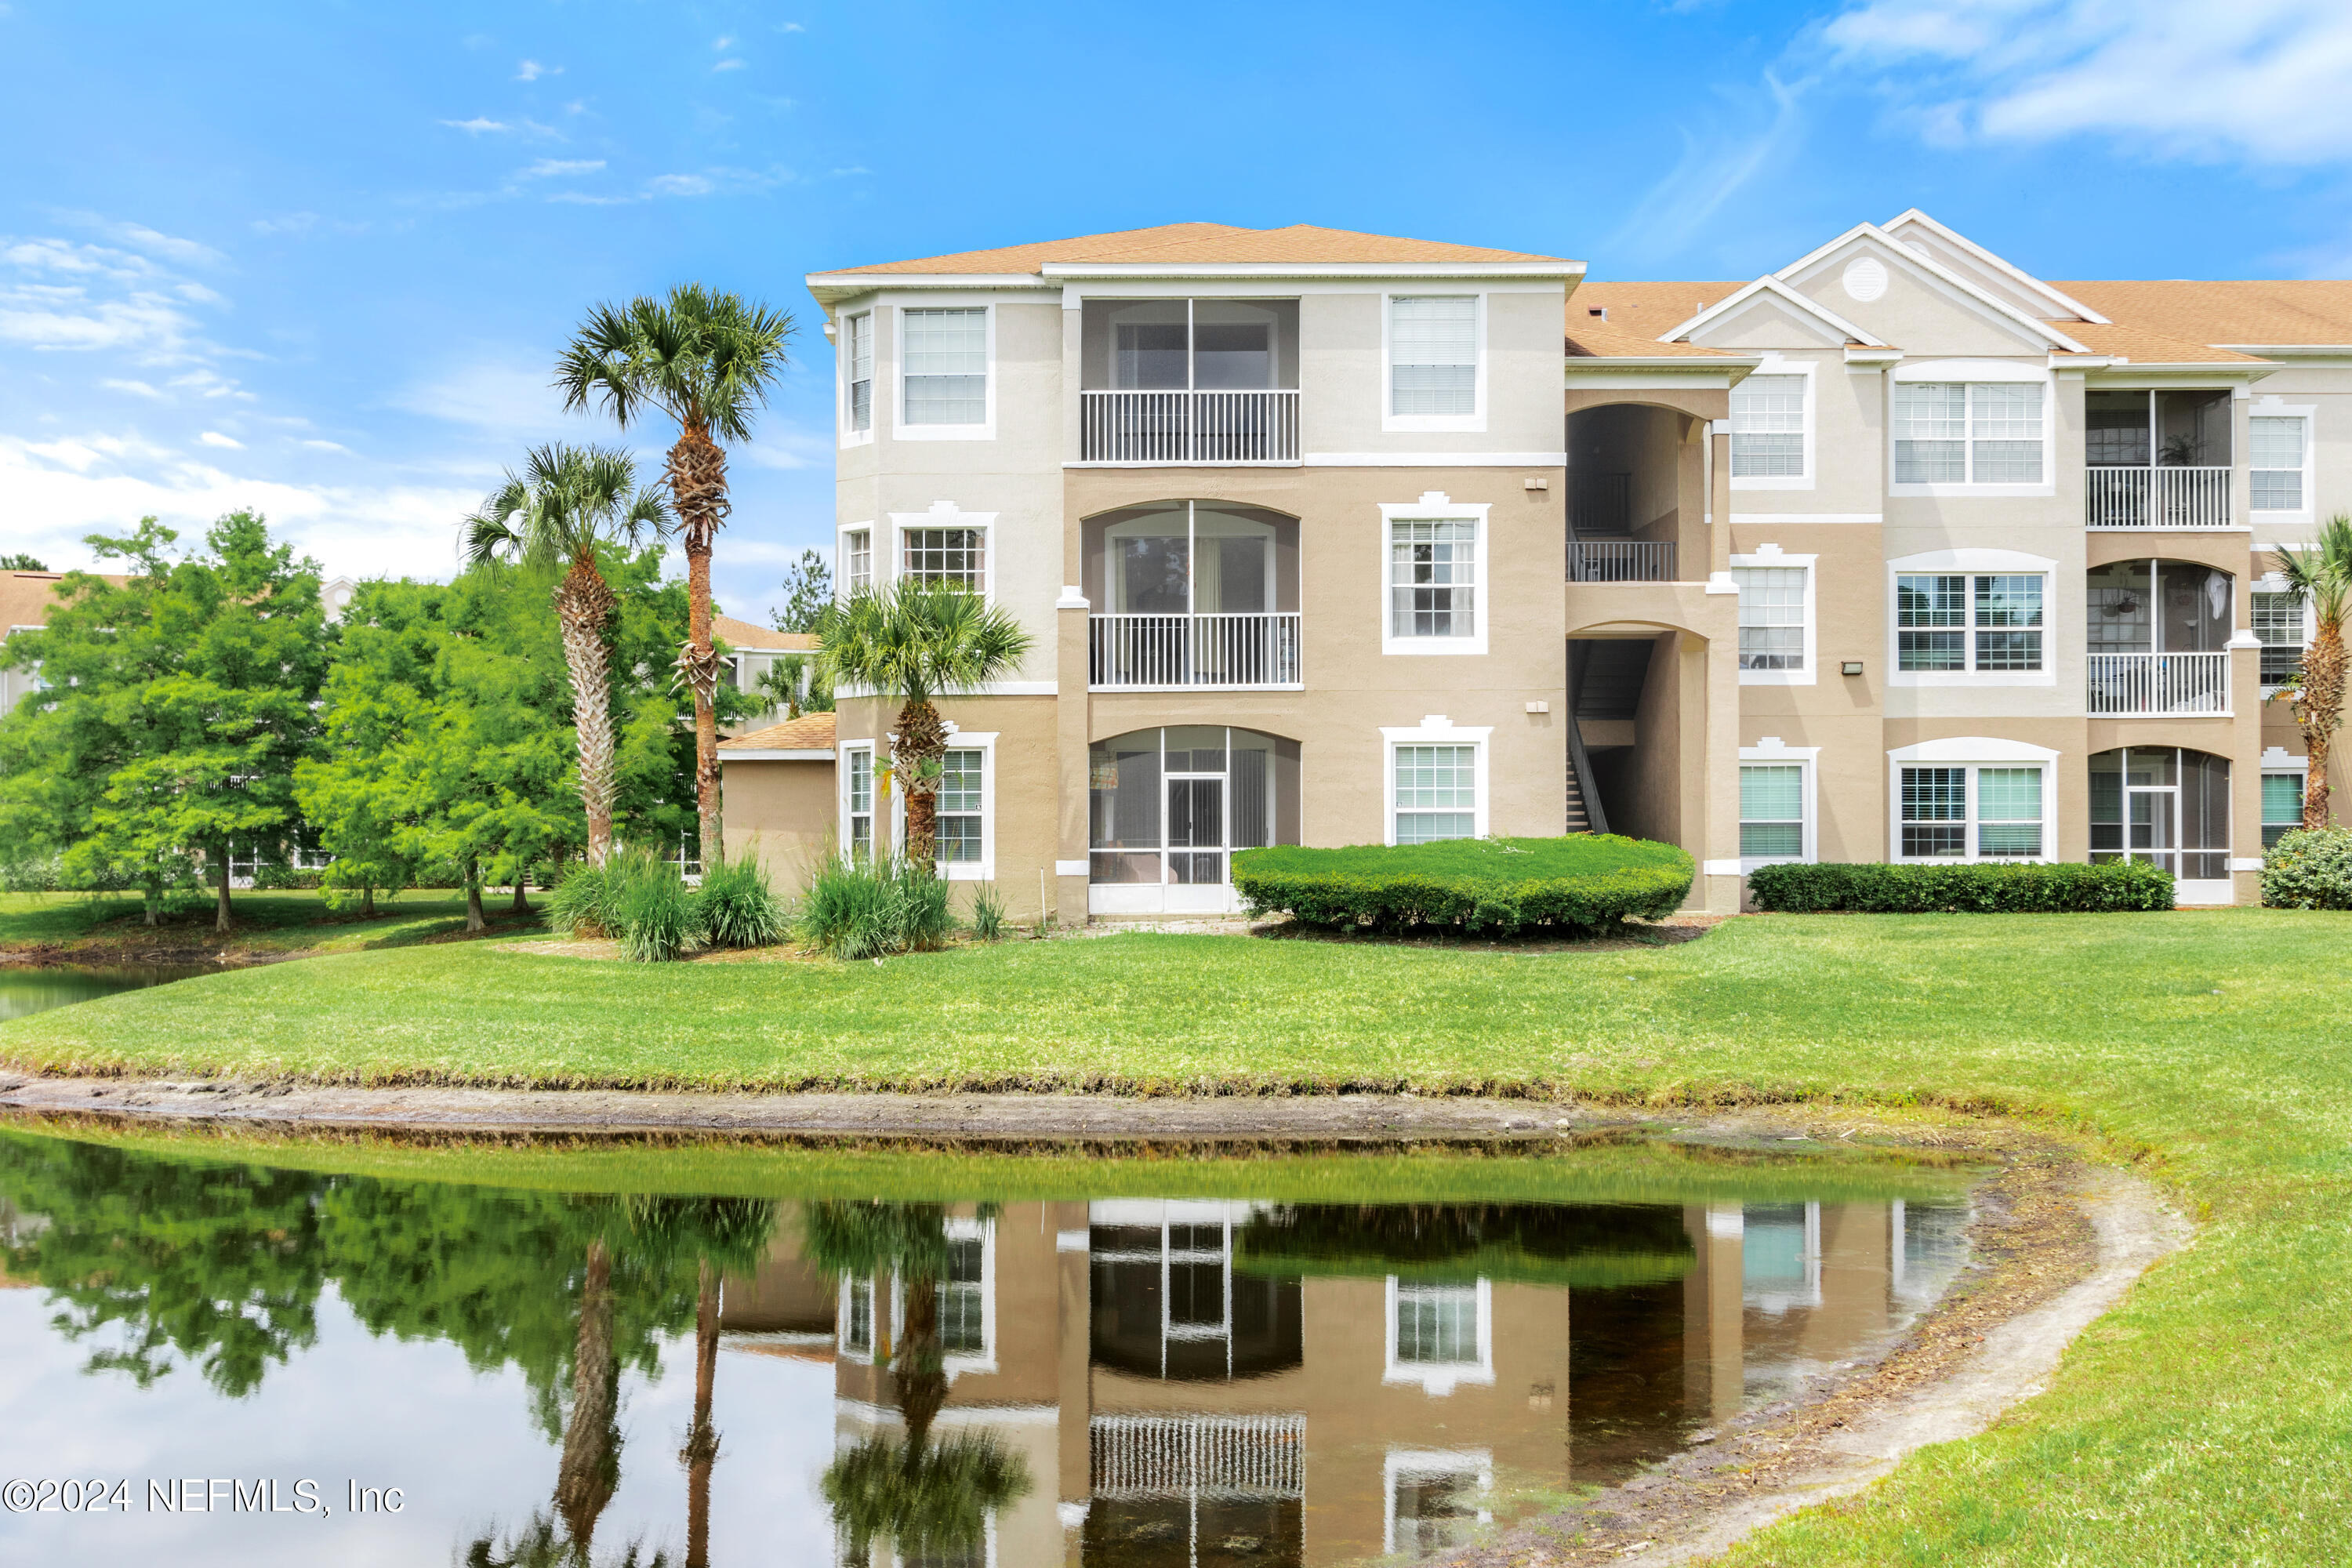 Jacksonville, FL home for sale located at 10550 Baymeadows Road Unit 908, Jacksonville, FL 32256